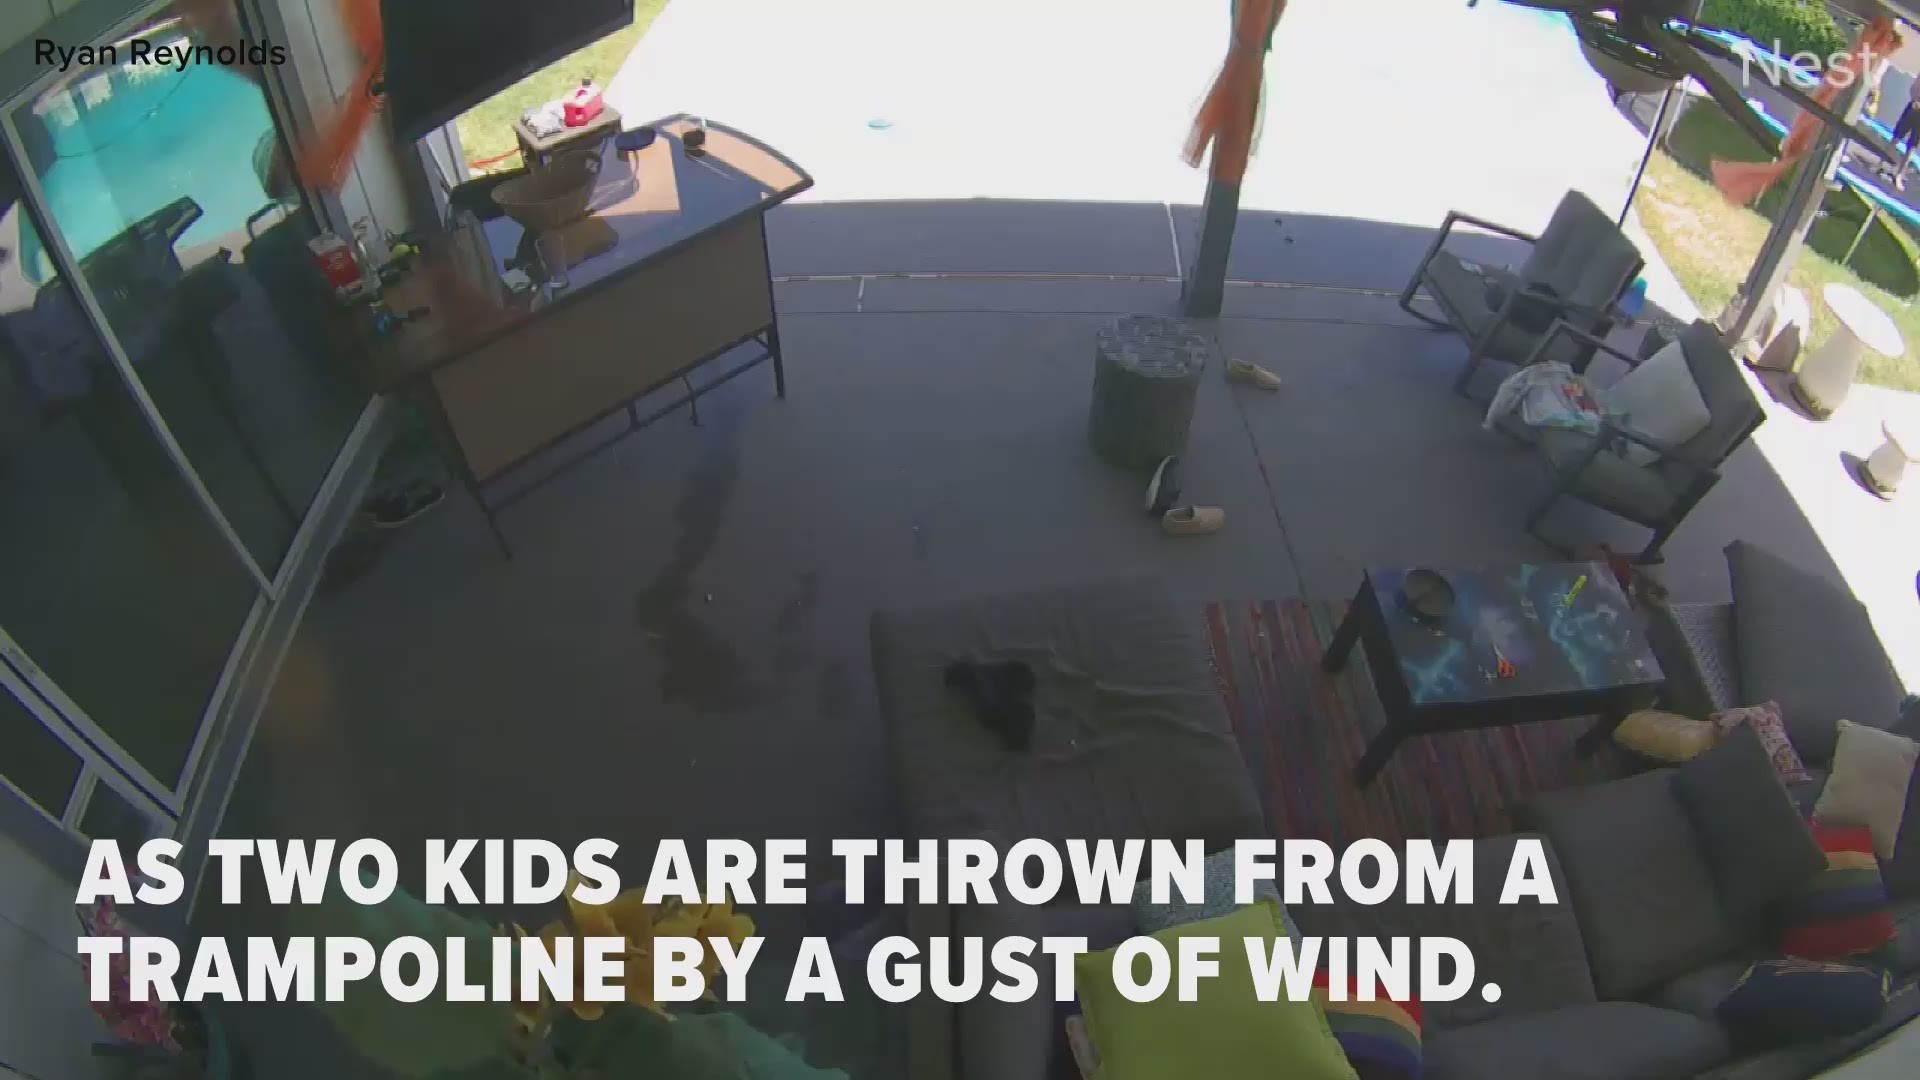 On May 27, 2019, two boys were thrown off a trampoline in Tempe, Arizona. One boy sustained a fractured elbow and a pelvis injury while the other was uninjured. Video: Ryan Reynolds